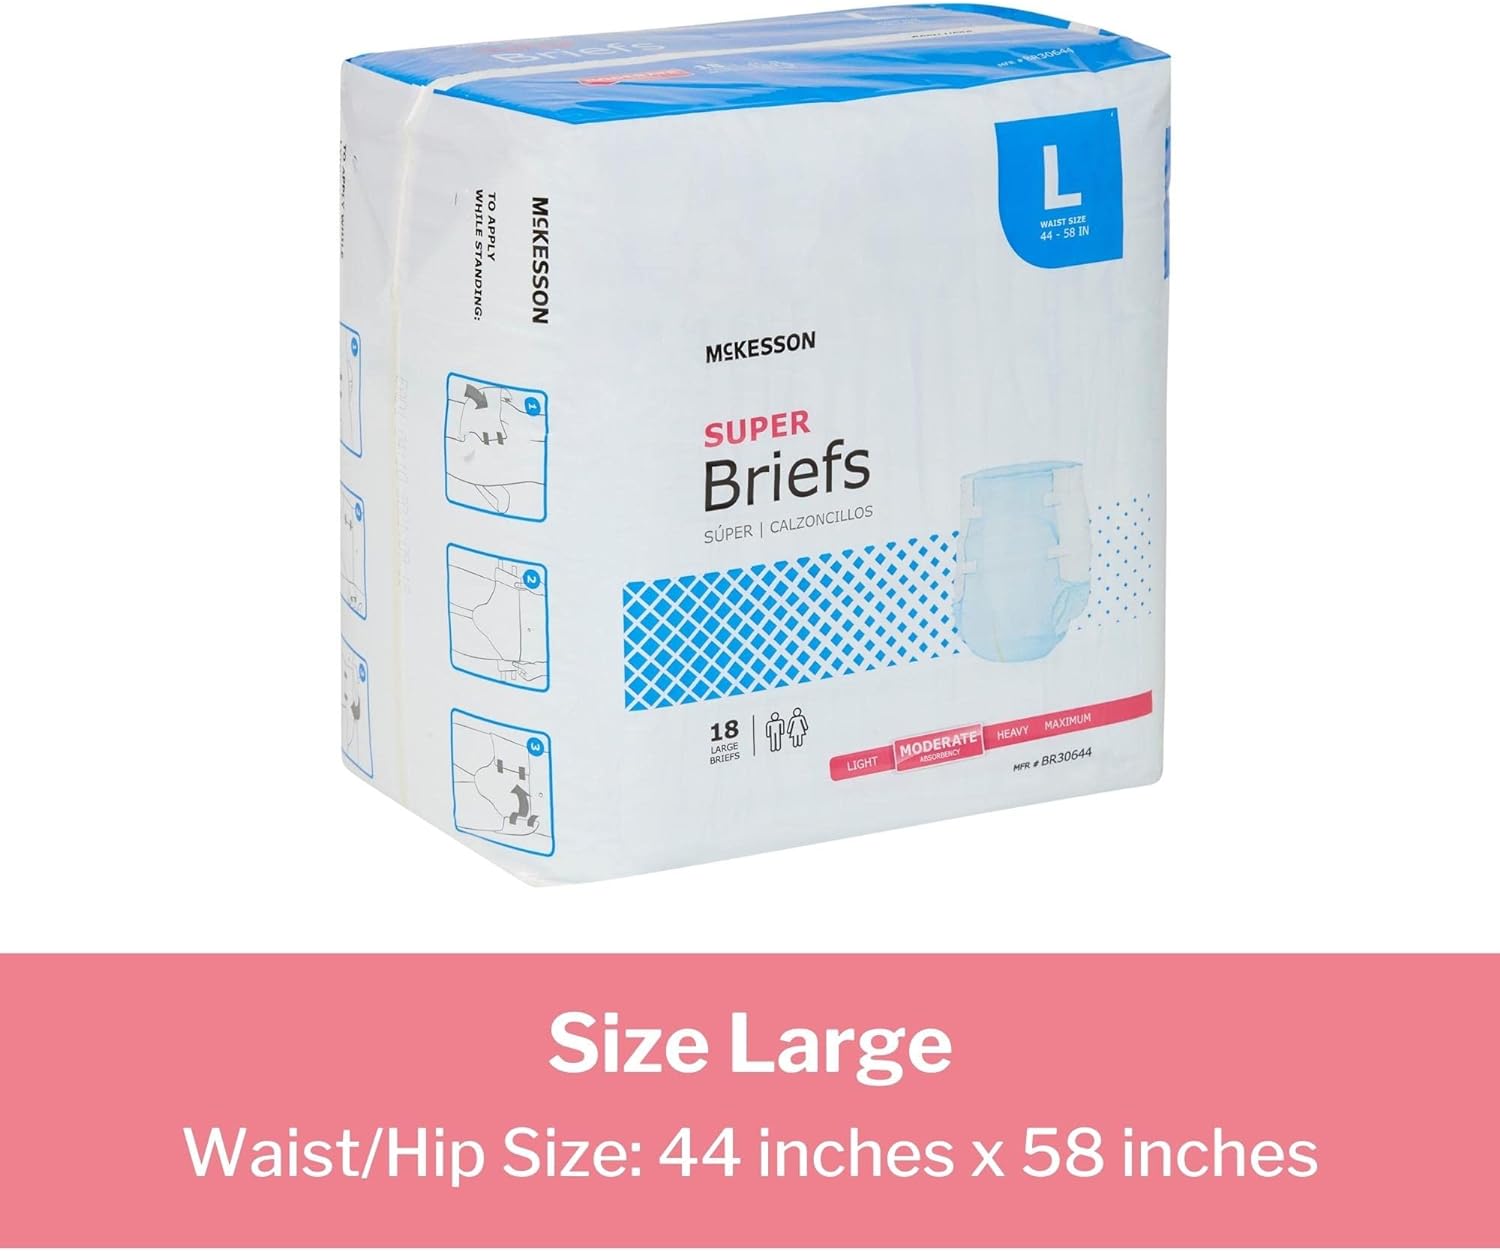 McKesson Super Briefs, Incontinence, Moderate Absorbency, Large, 18 Count, 1 Pack